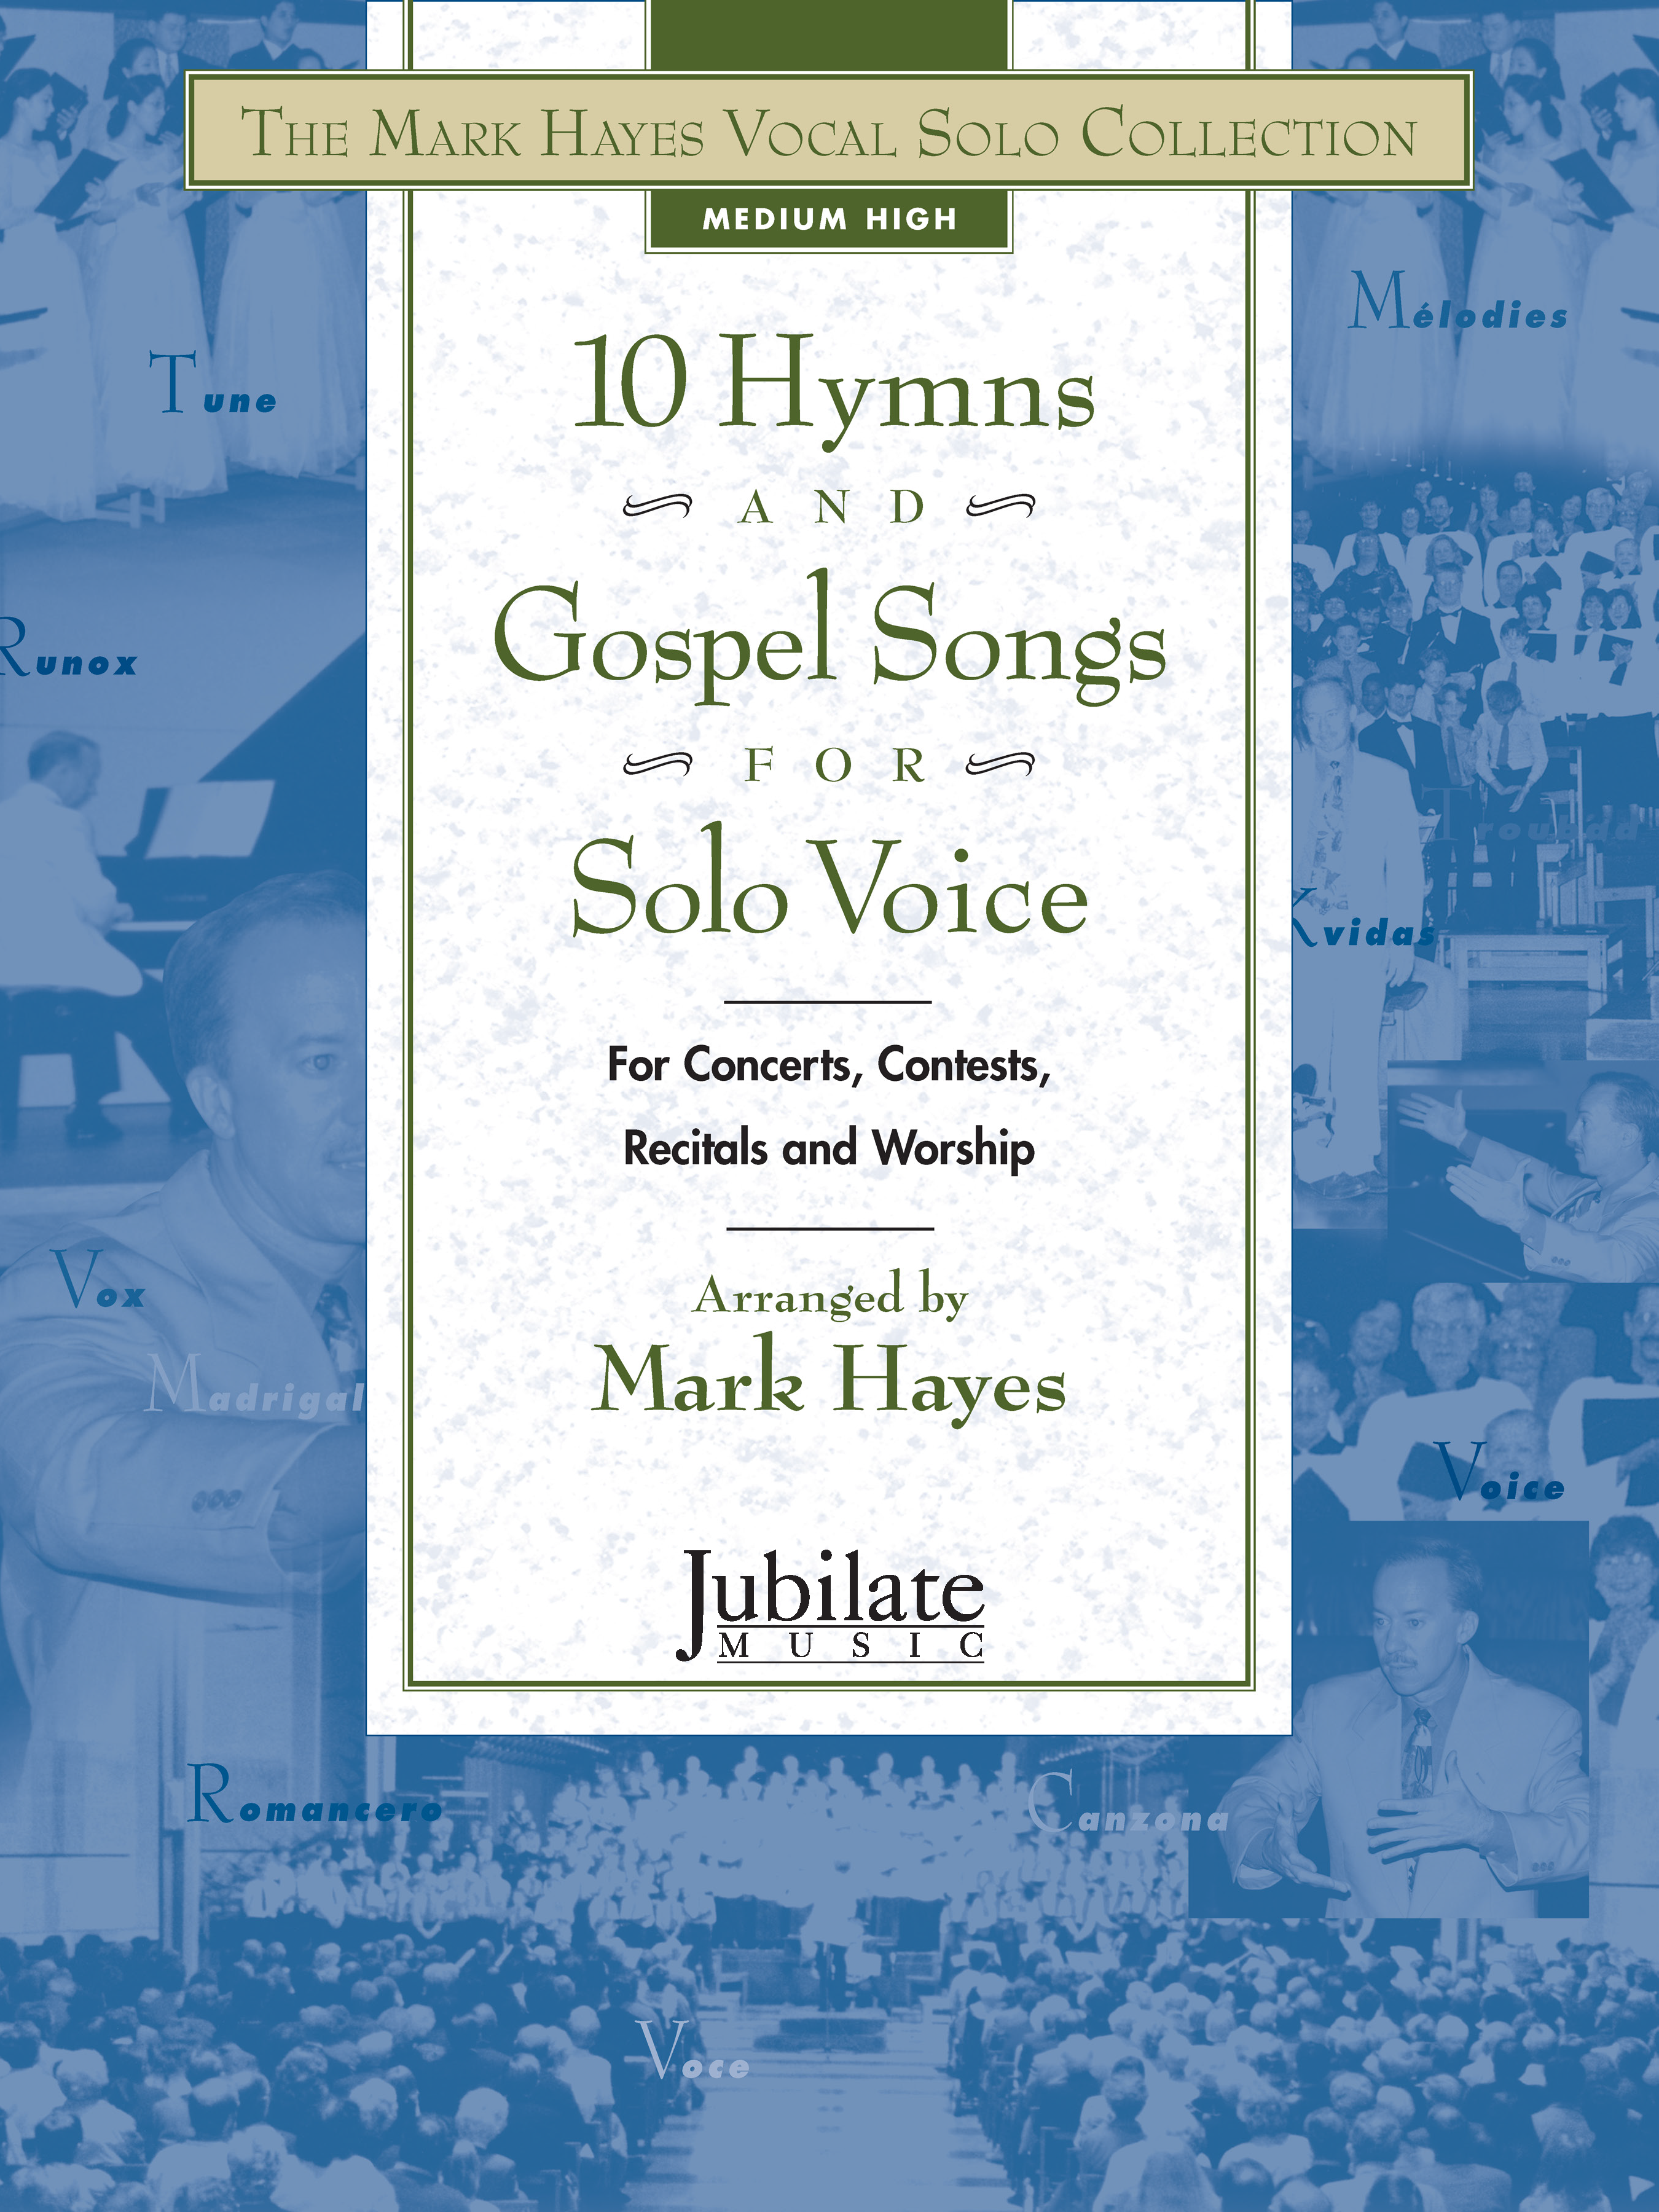 The Mark Hayes Vocal Solo Collection: 10 Hymns and Gospel Songs for So